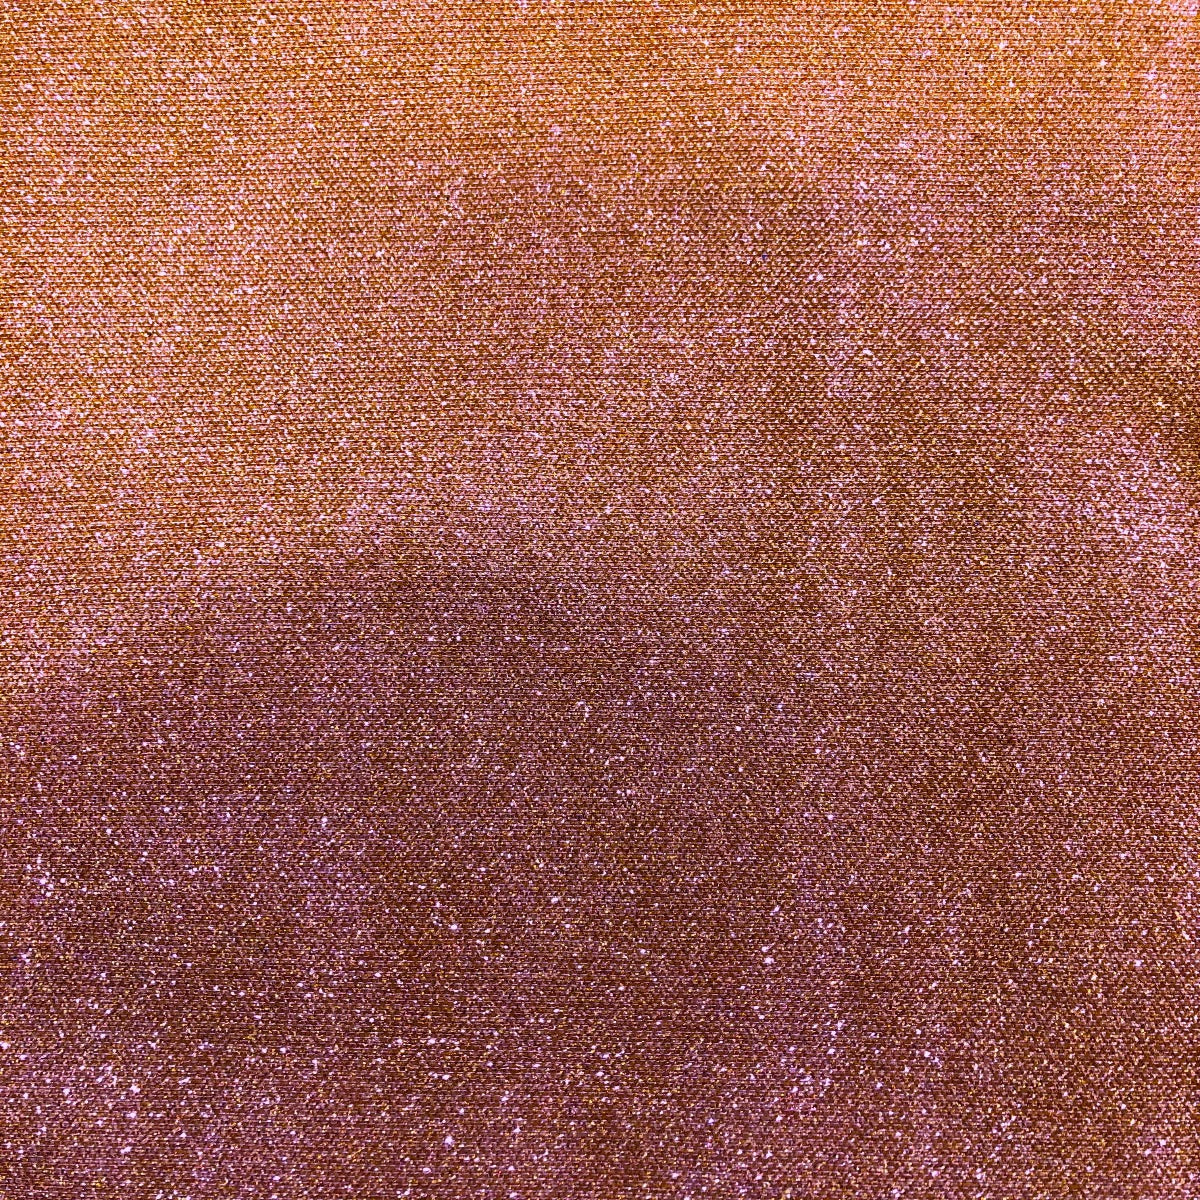 Dusty Pink Gold Holographic Shimmer Glitter Spandex Fabric - Fashion Fabrics Los Angeles 